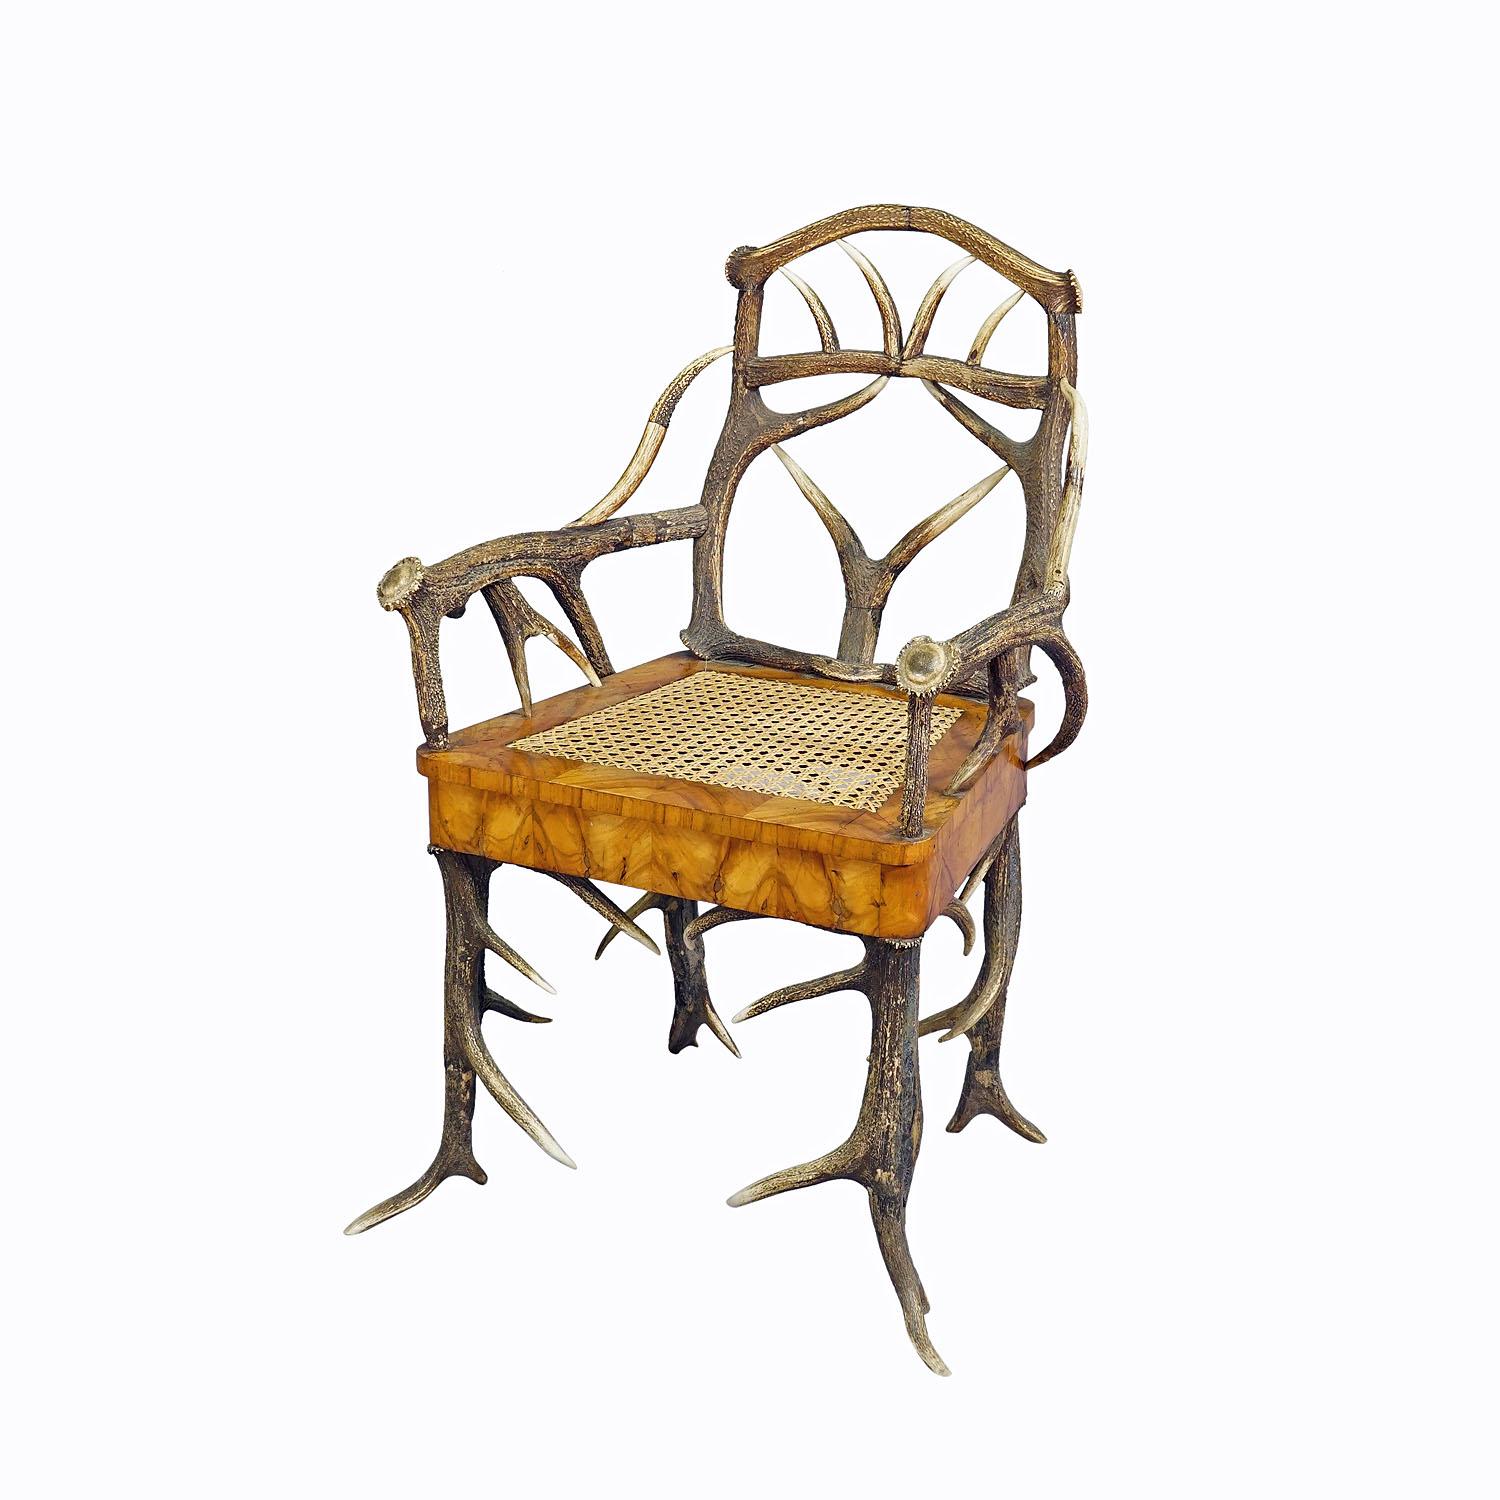 Black Forest Antler Arm Chair by J. A. K. Horn, Turingen 1840s

An elaborate antique Black Forest antler arm chair with real stag and deer antlers as legs, arm- and backrests, seat with cherry veneer and wicker mesh. Manufactured by Johann August